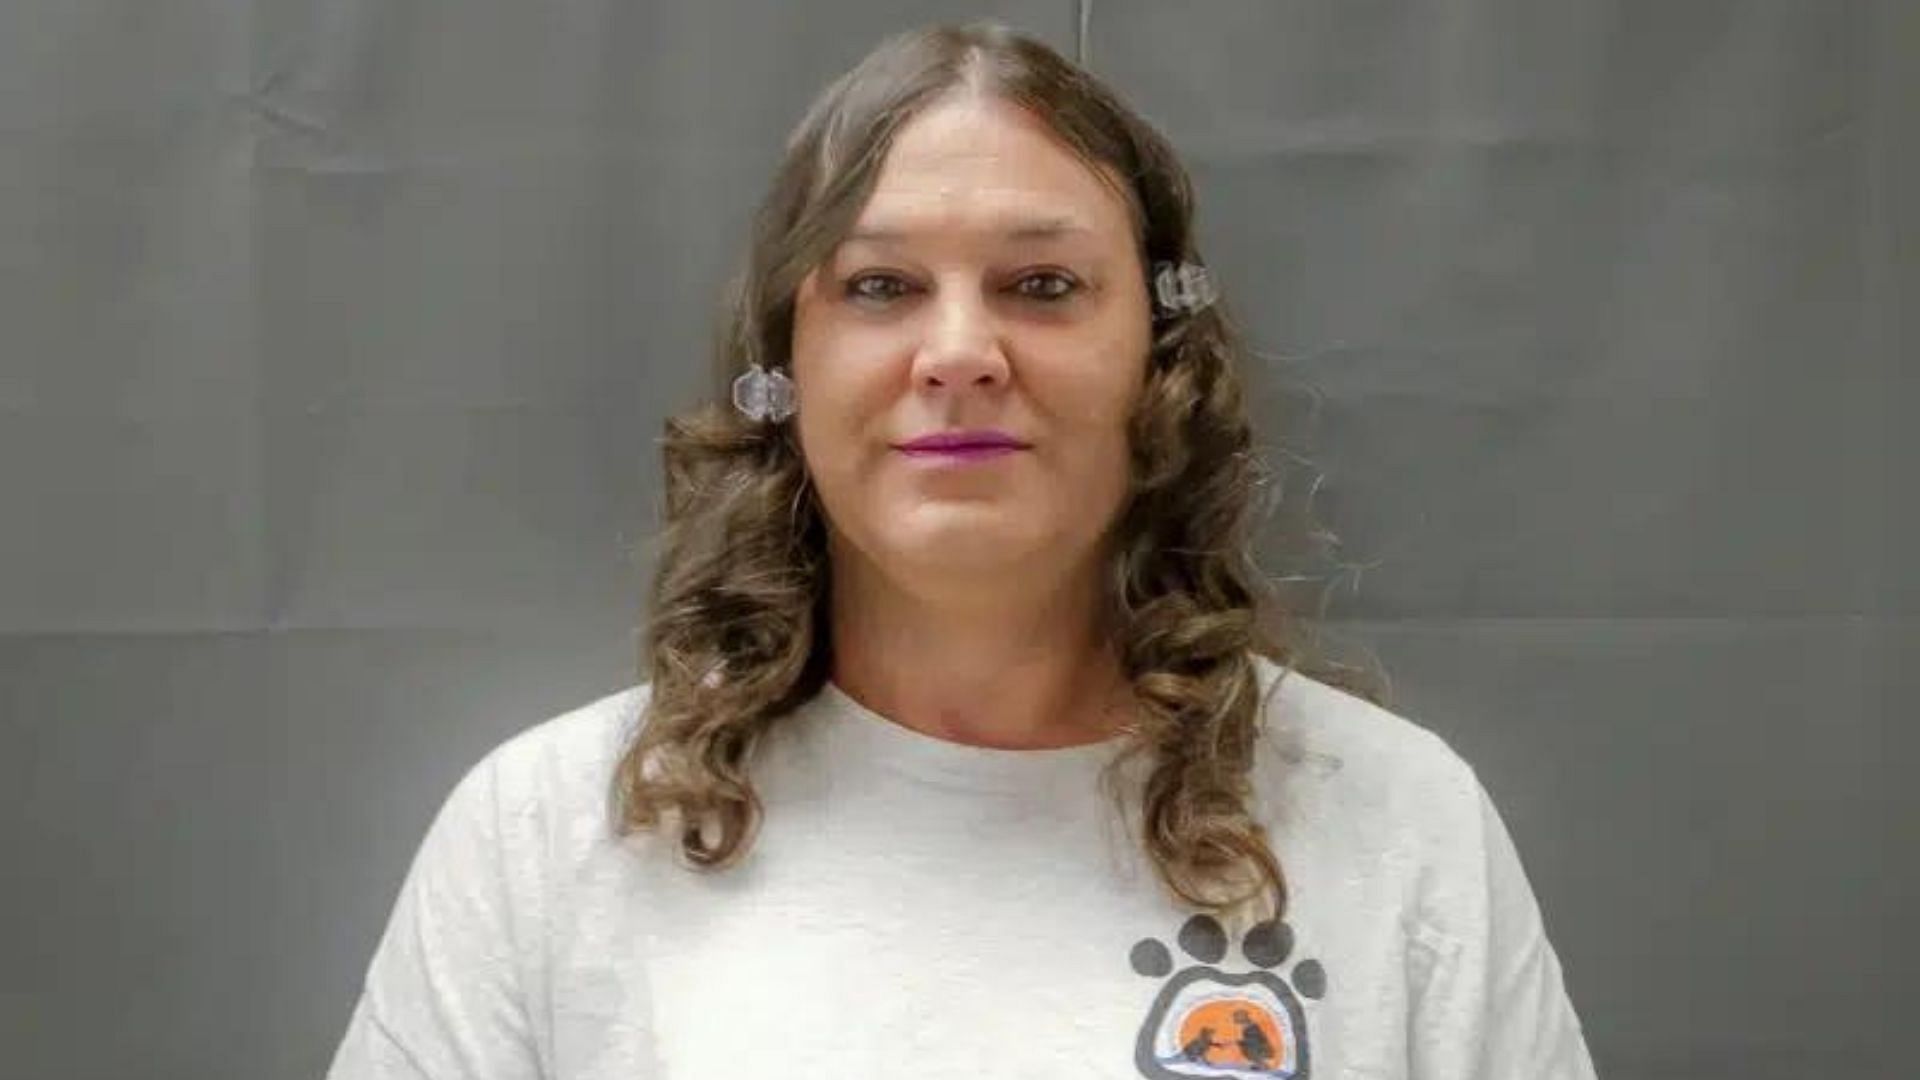 Amber McLaughlin is detained at Missouri&rsquo;s Eastern Reception, Diagnostic, and Correction Center in Bonne Terre (Image via Associated Press).